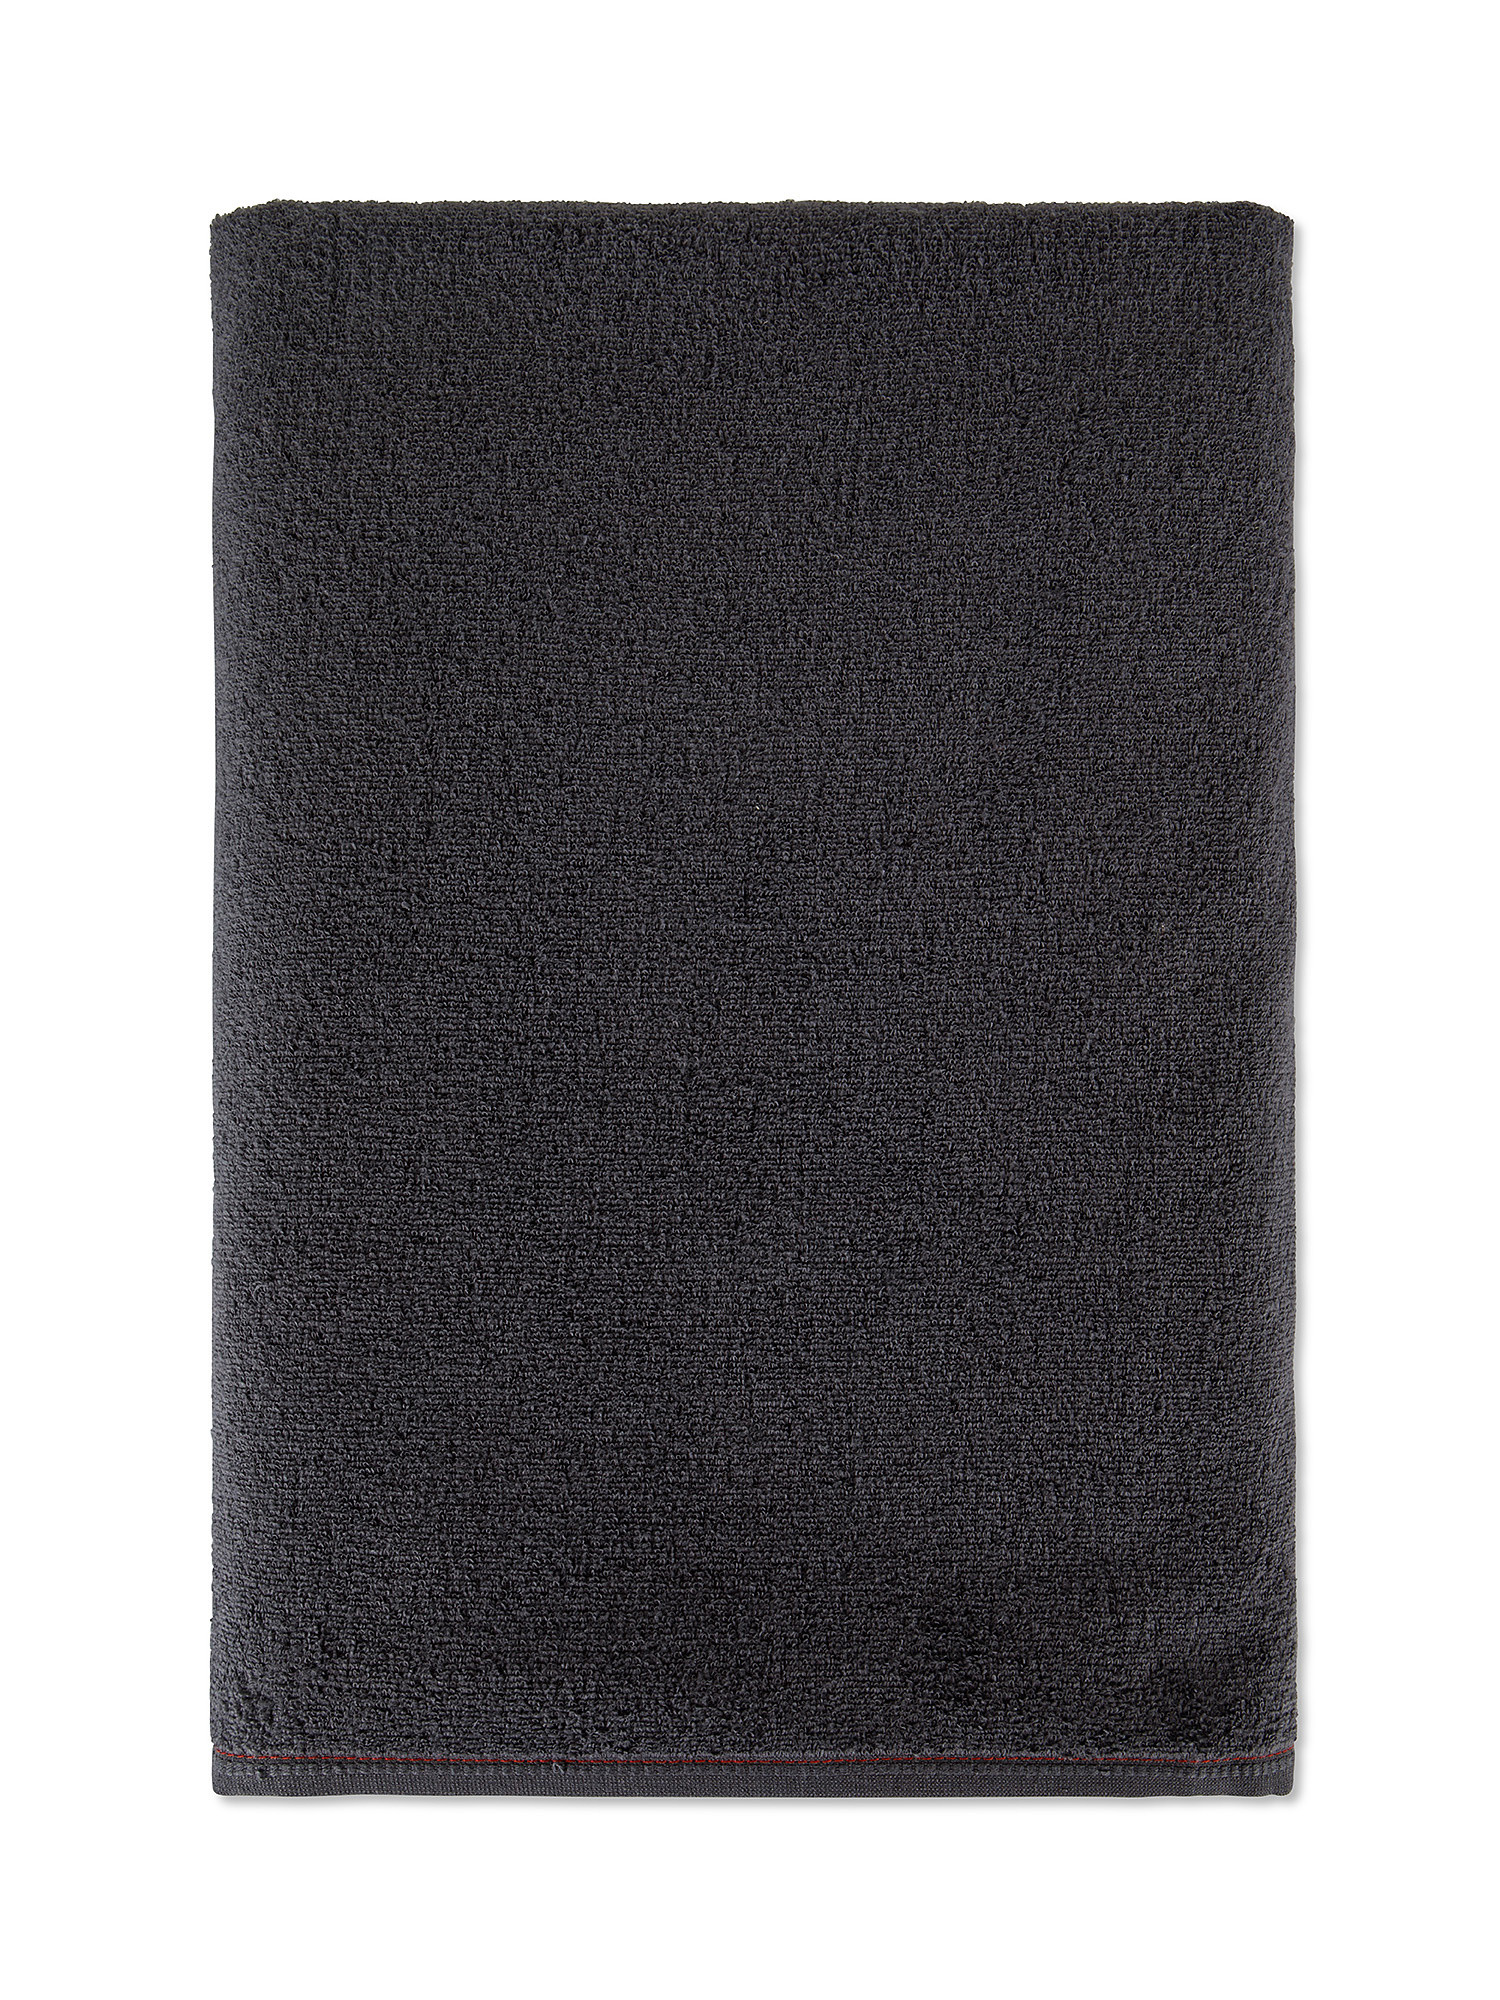 Thermae fine cotton terry towel, Dark Grey, large image number 0